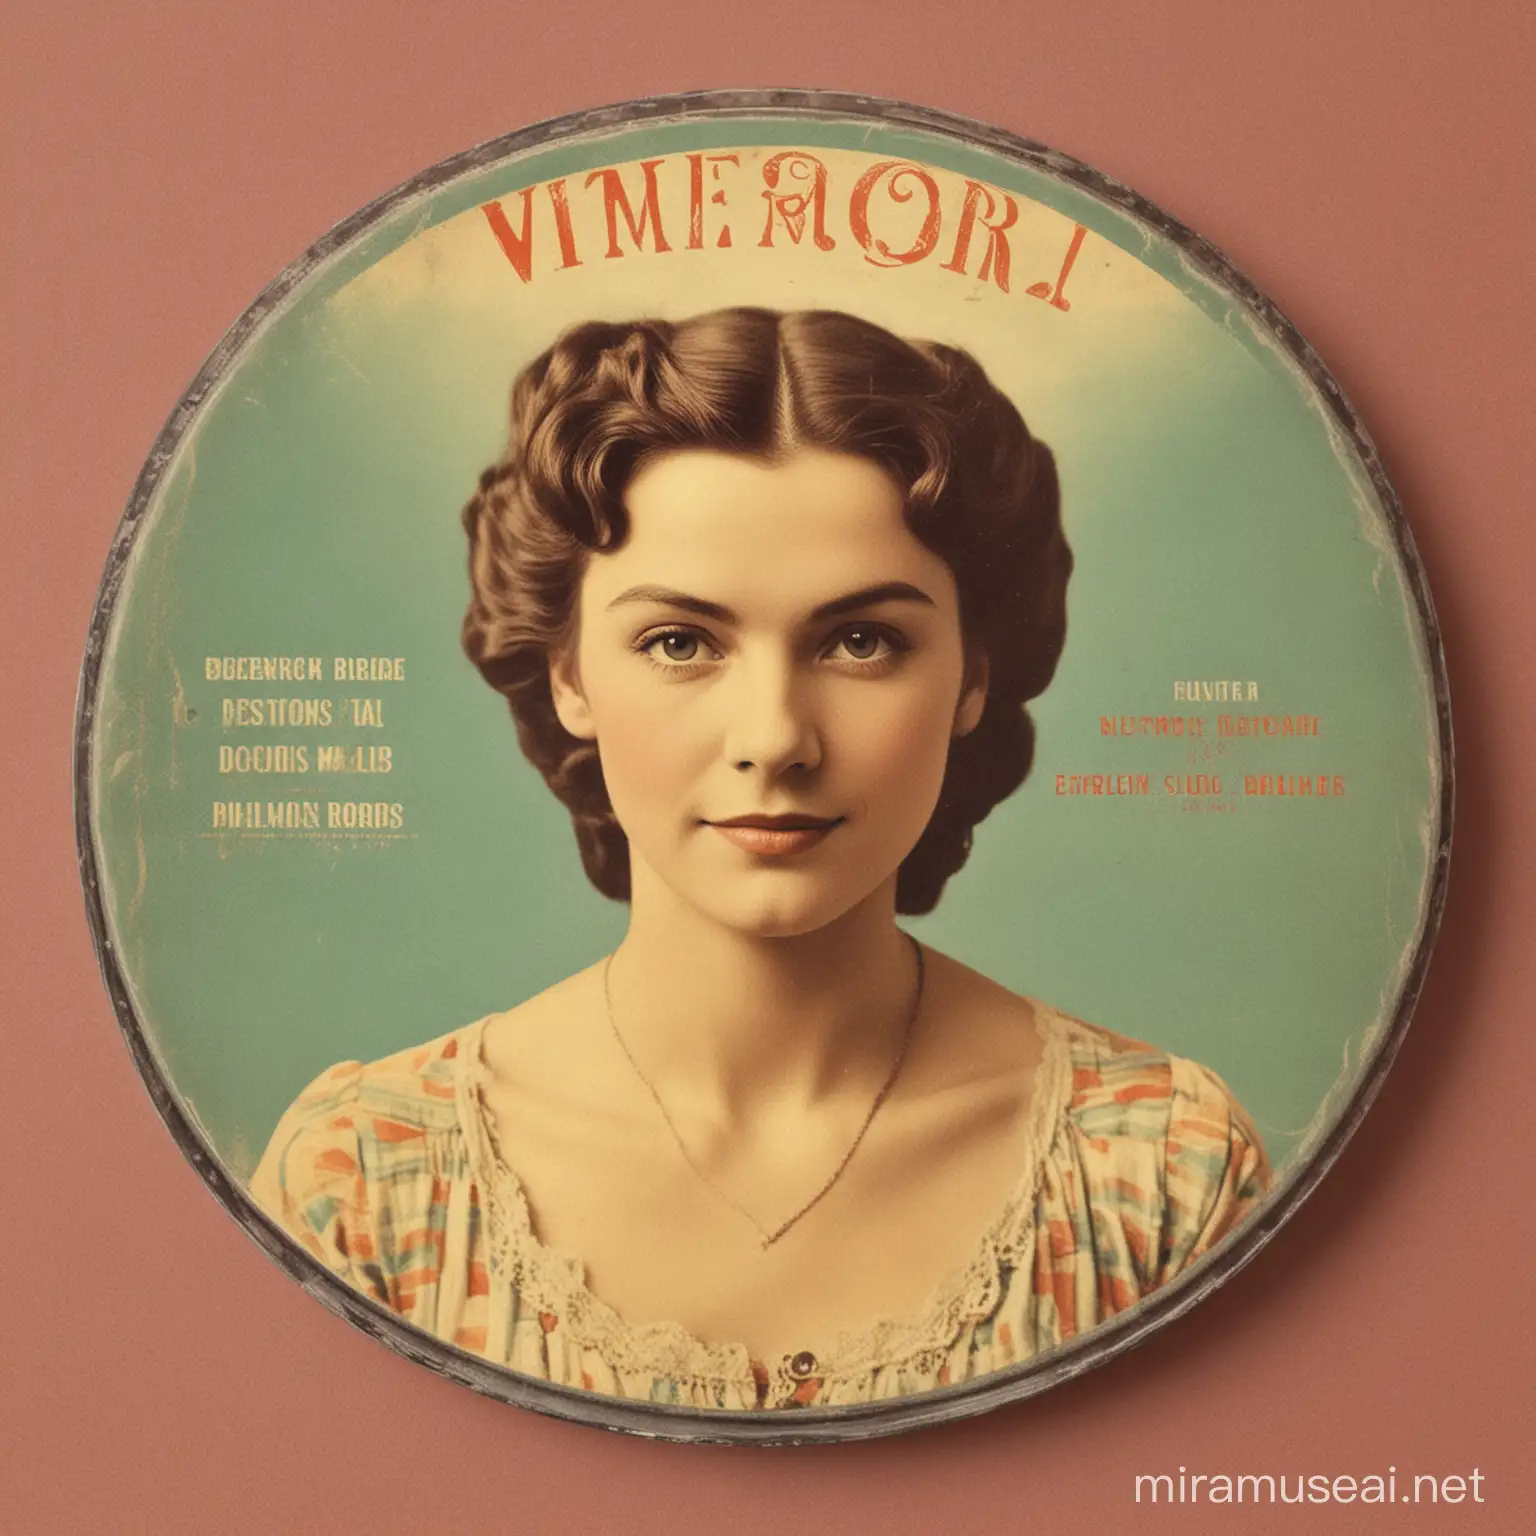 Vintage Woman Centered Disc Cover Art in Retro Colors